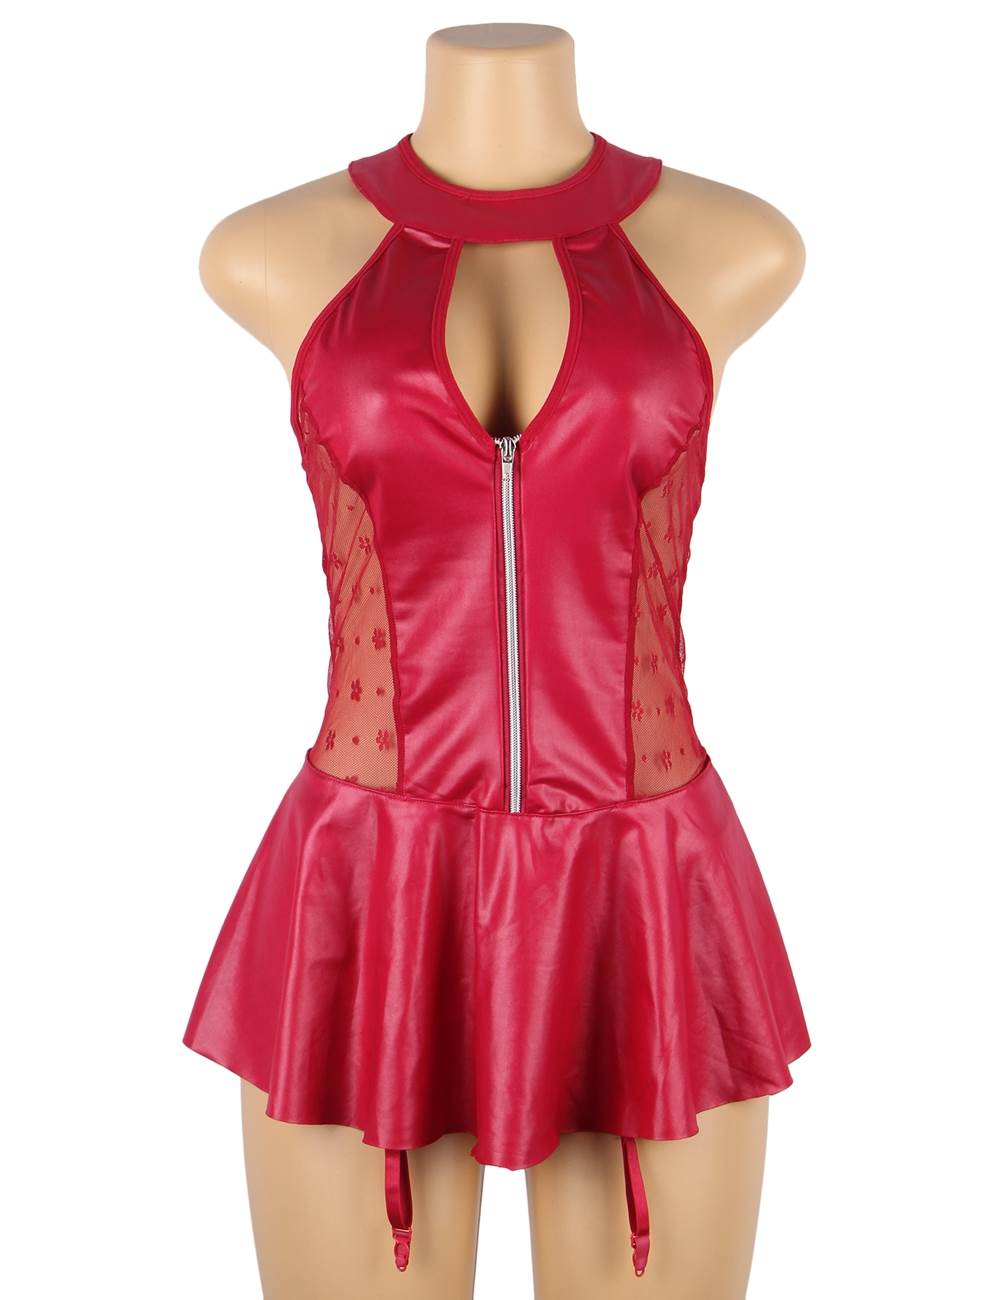 Plus Size Red Sexy Halter Leather Lace Stitching Gartered Lingerie - R80941-2P - Love it Curvy